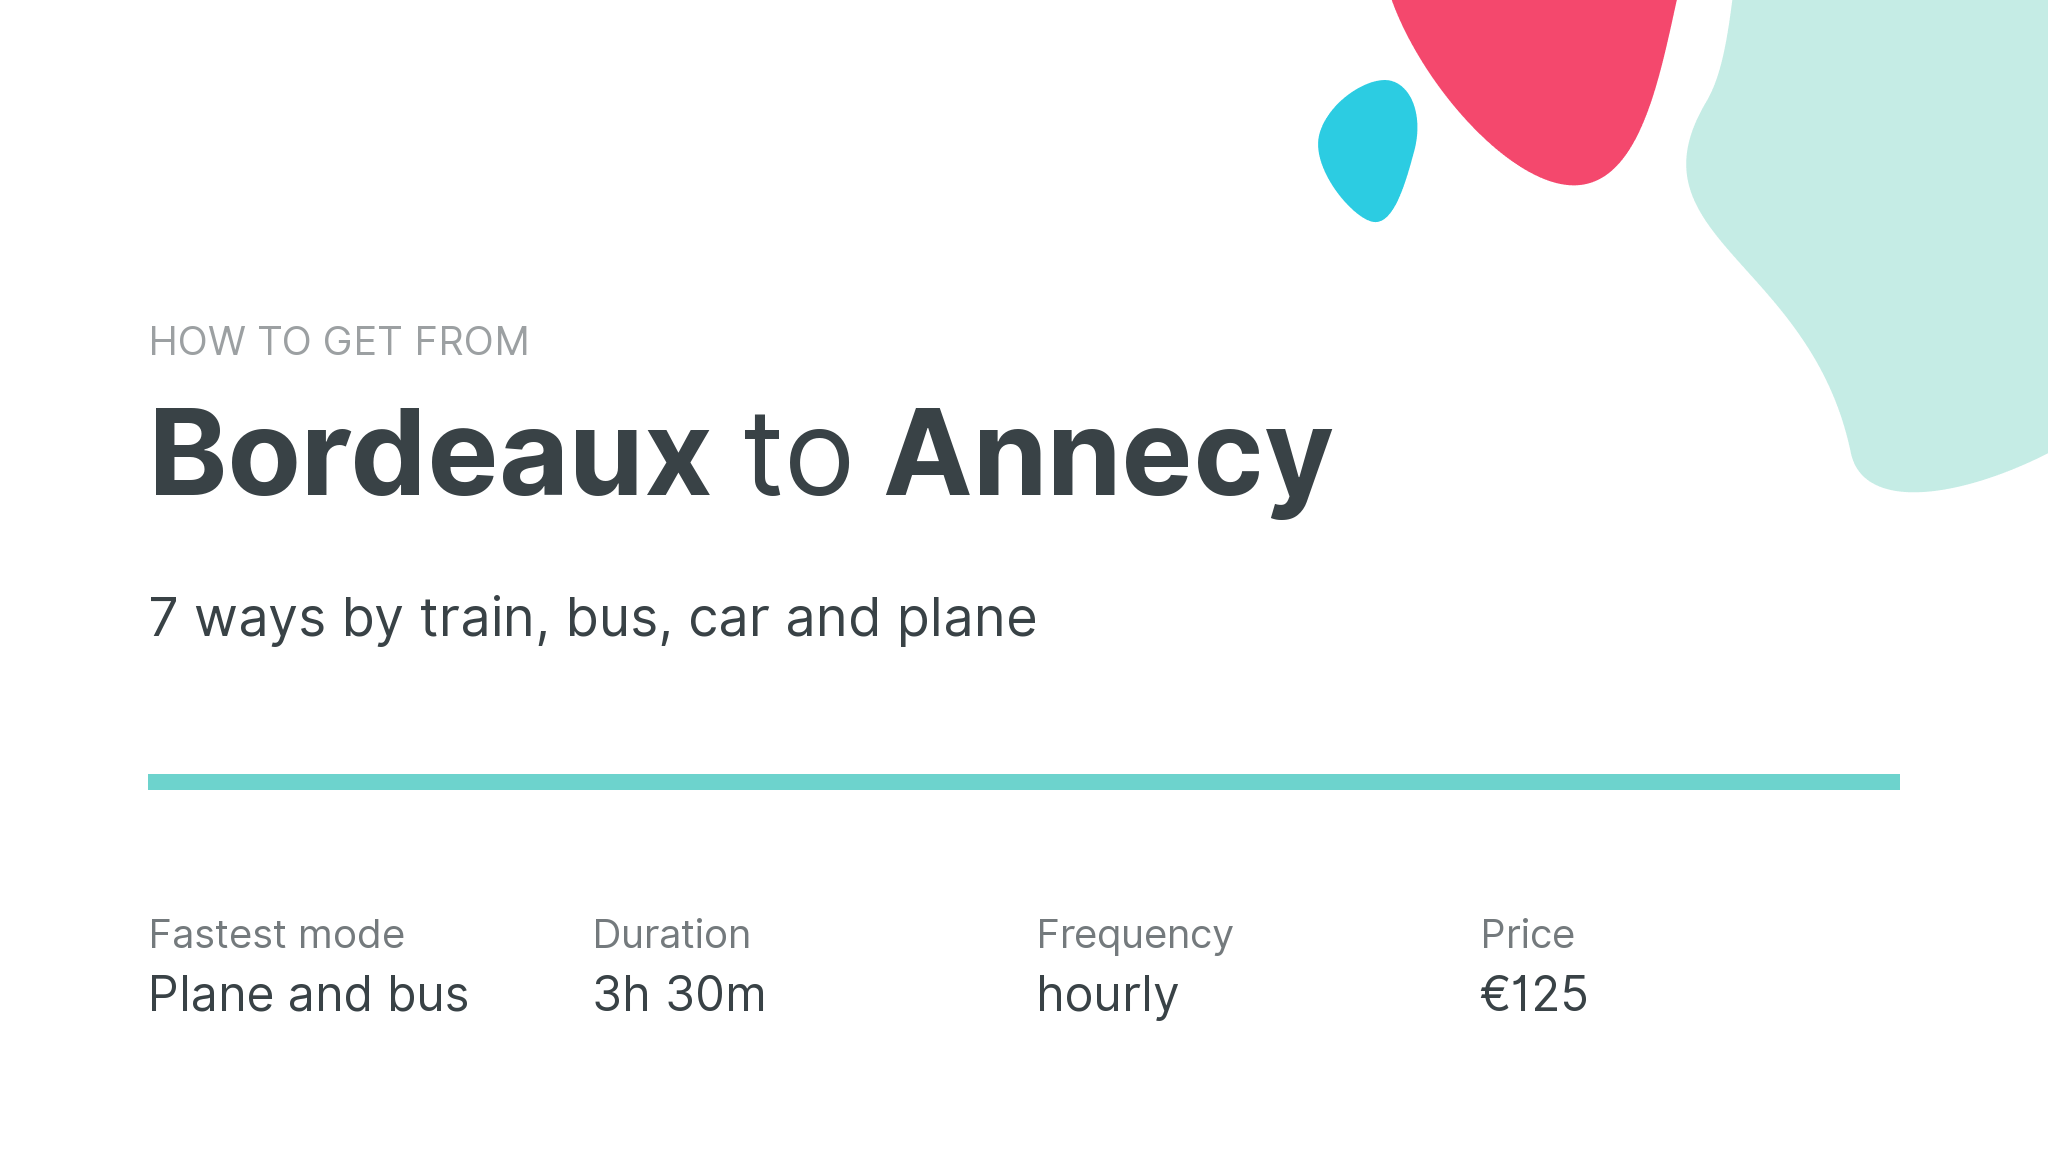 How do I get from Bordeaux to Annecy